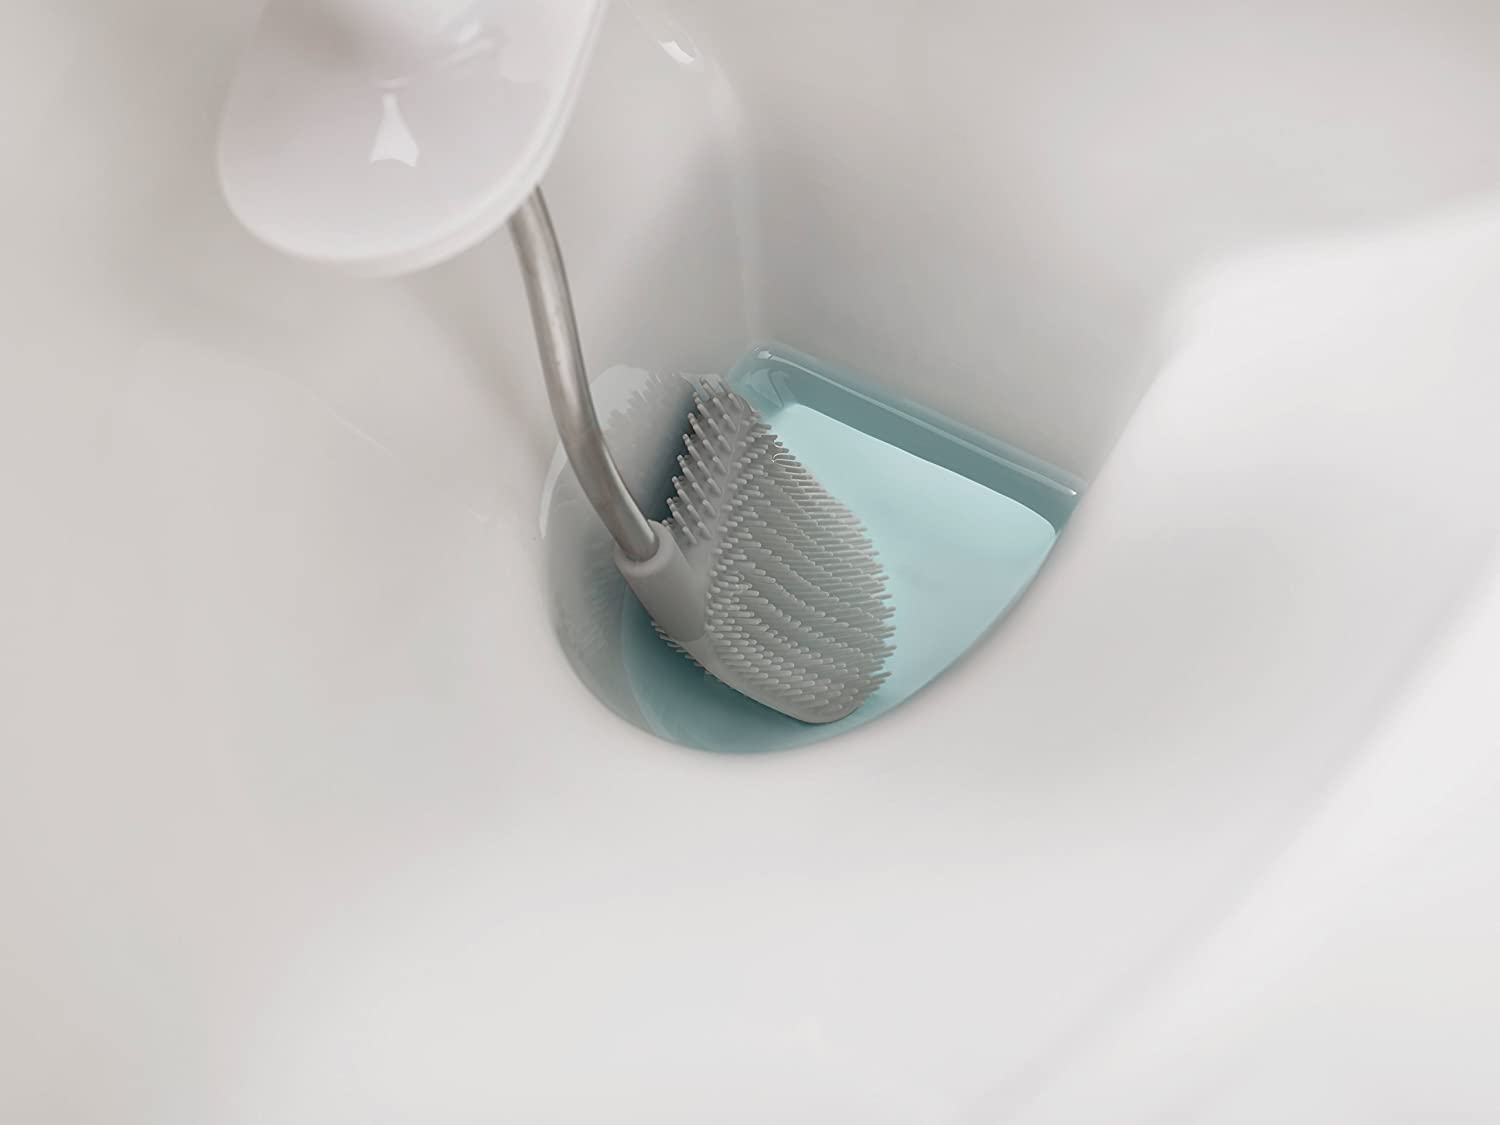 Meilleure brosse WC silicone 2022